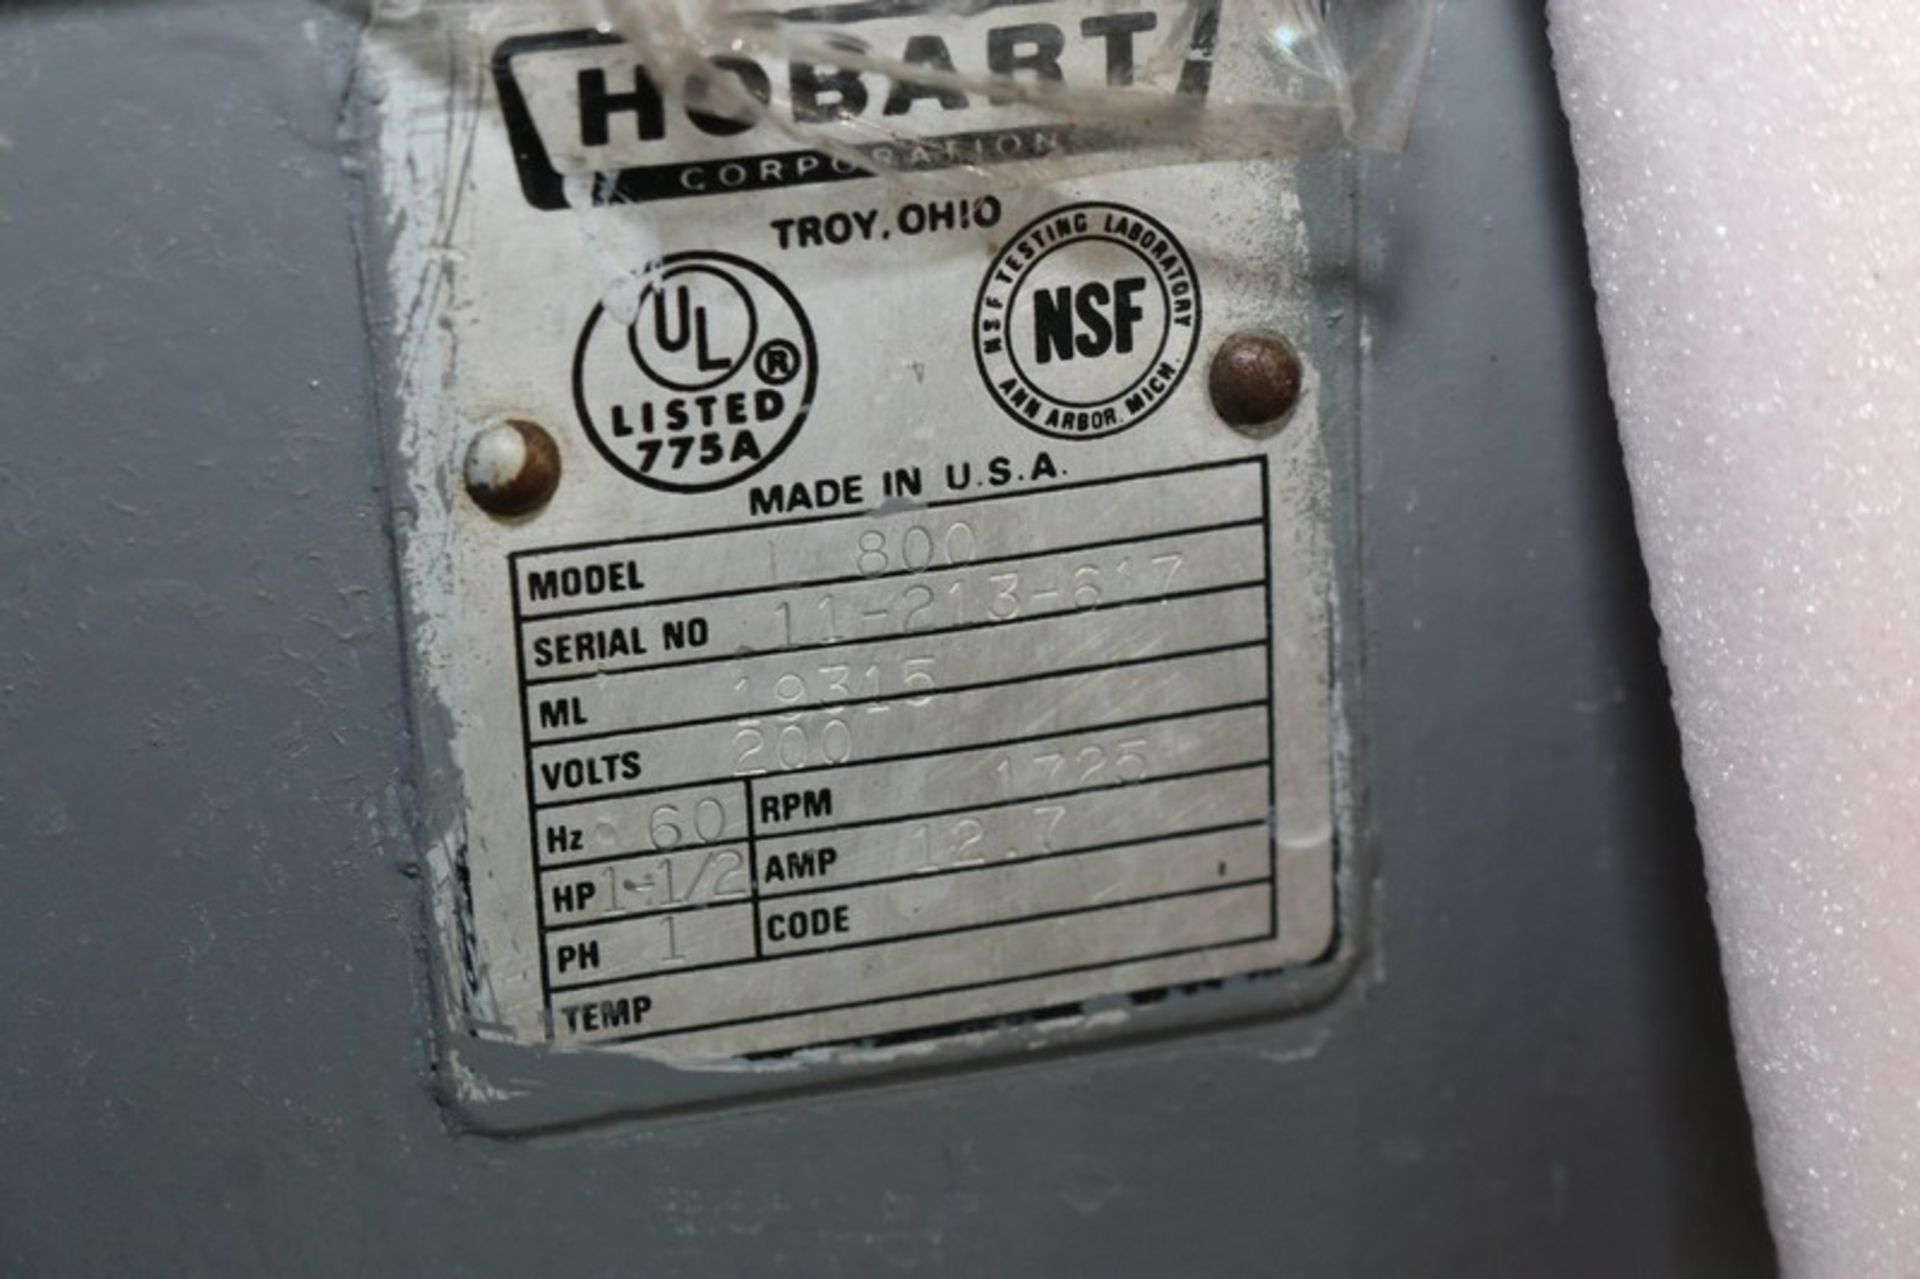 Hobart Mixer,-M/N L-800, S/N 11-213-617, 200 Volts, 1725 RPM Motor, with 1-1/2 hp Motor, with S/S - Image 6 of 6